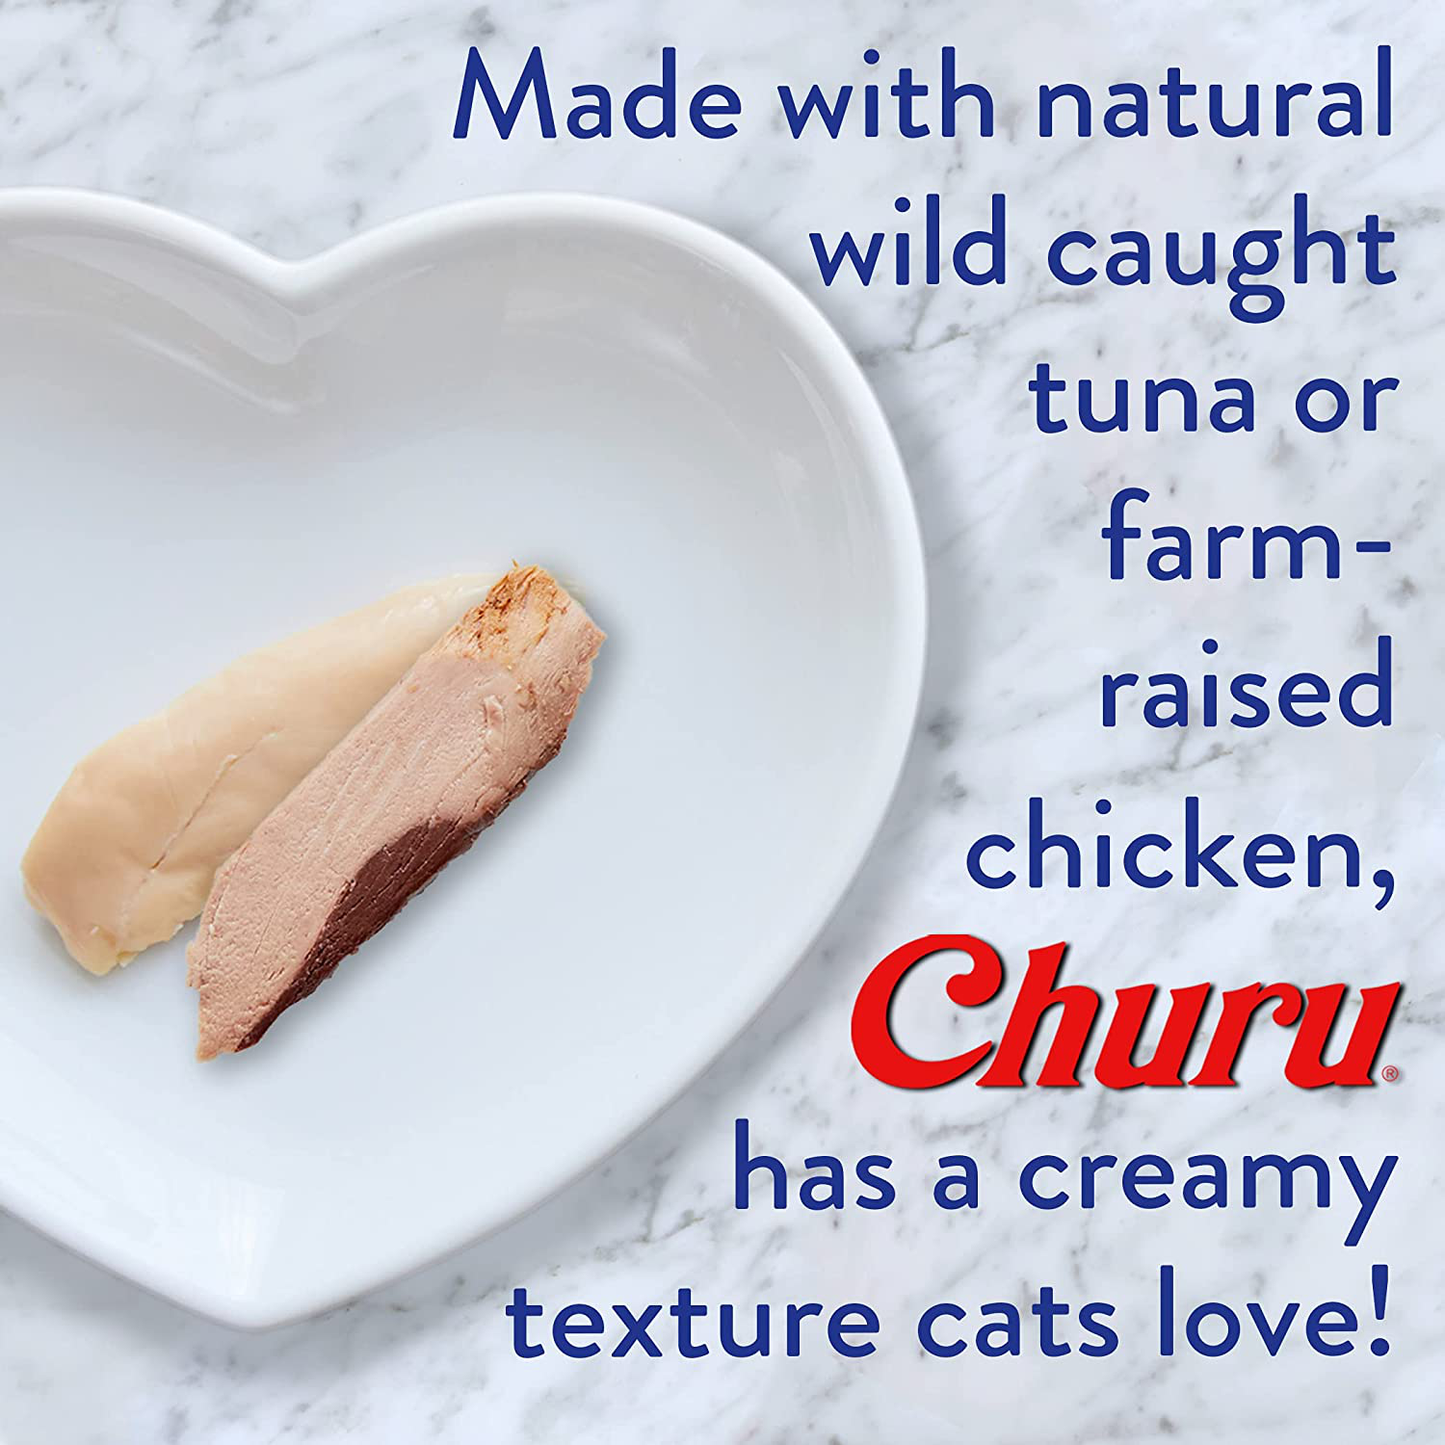 INABA Churu Cat Treats, Grain-Free, Lickable, Squeezable Creamy Purée Cat Treat/Topper with Vitamin E and Green Tea Extract, 0.5 Ounces Each Tube, 50 Tubes, Tuna & Chicken Variety Animals & Pet Supplies > Pet Supplies > Bird Supplies > Bird Treats INABA   